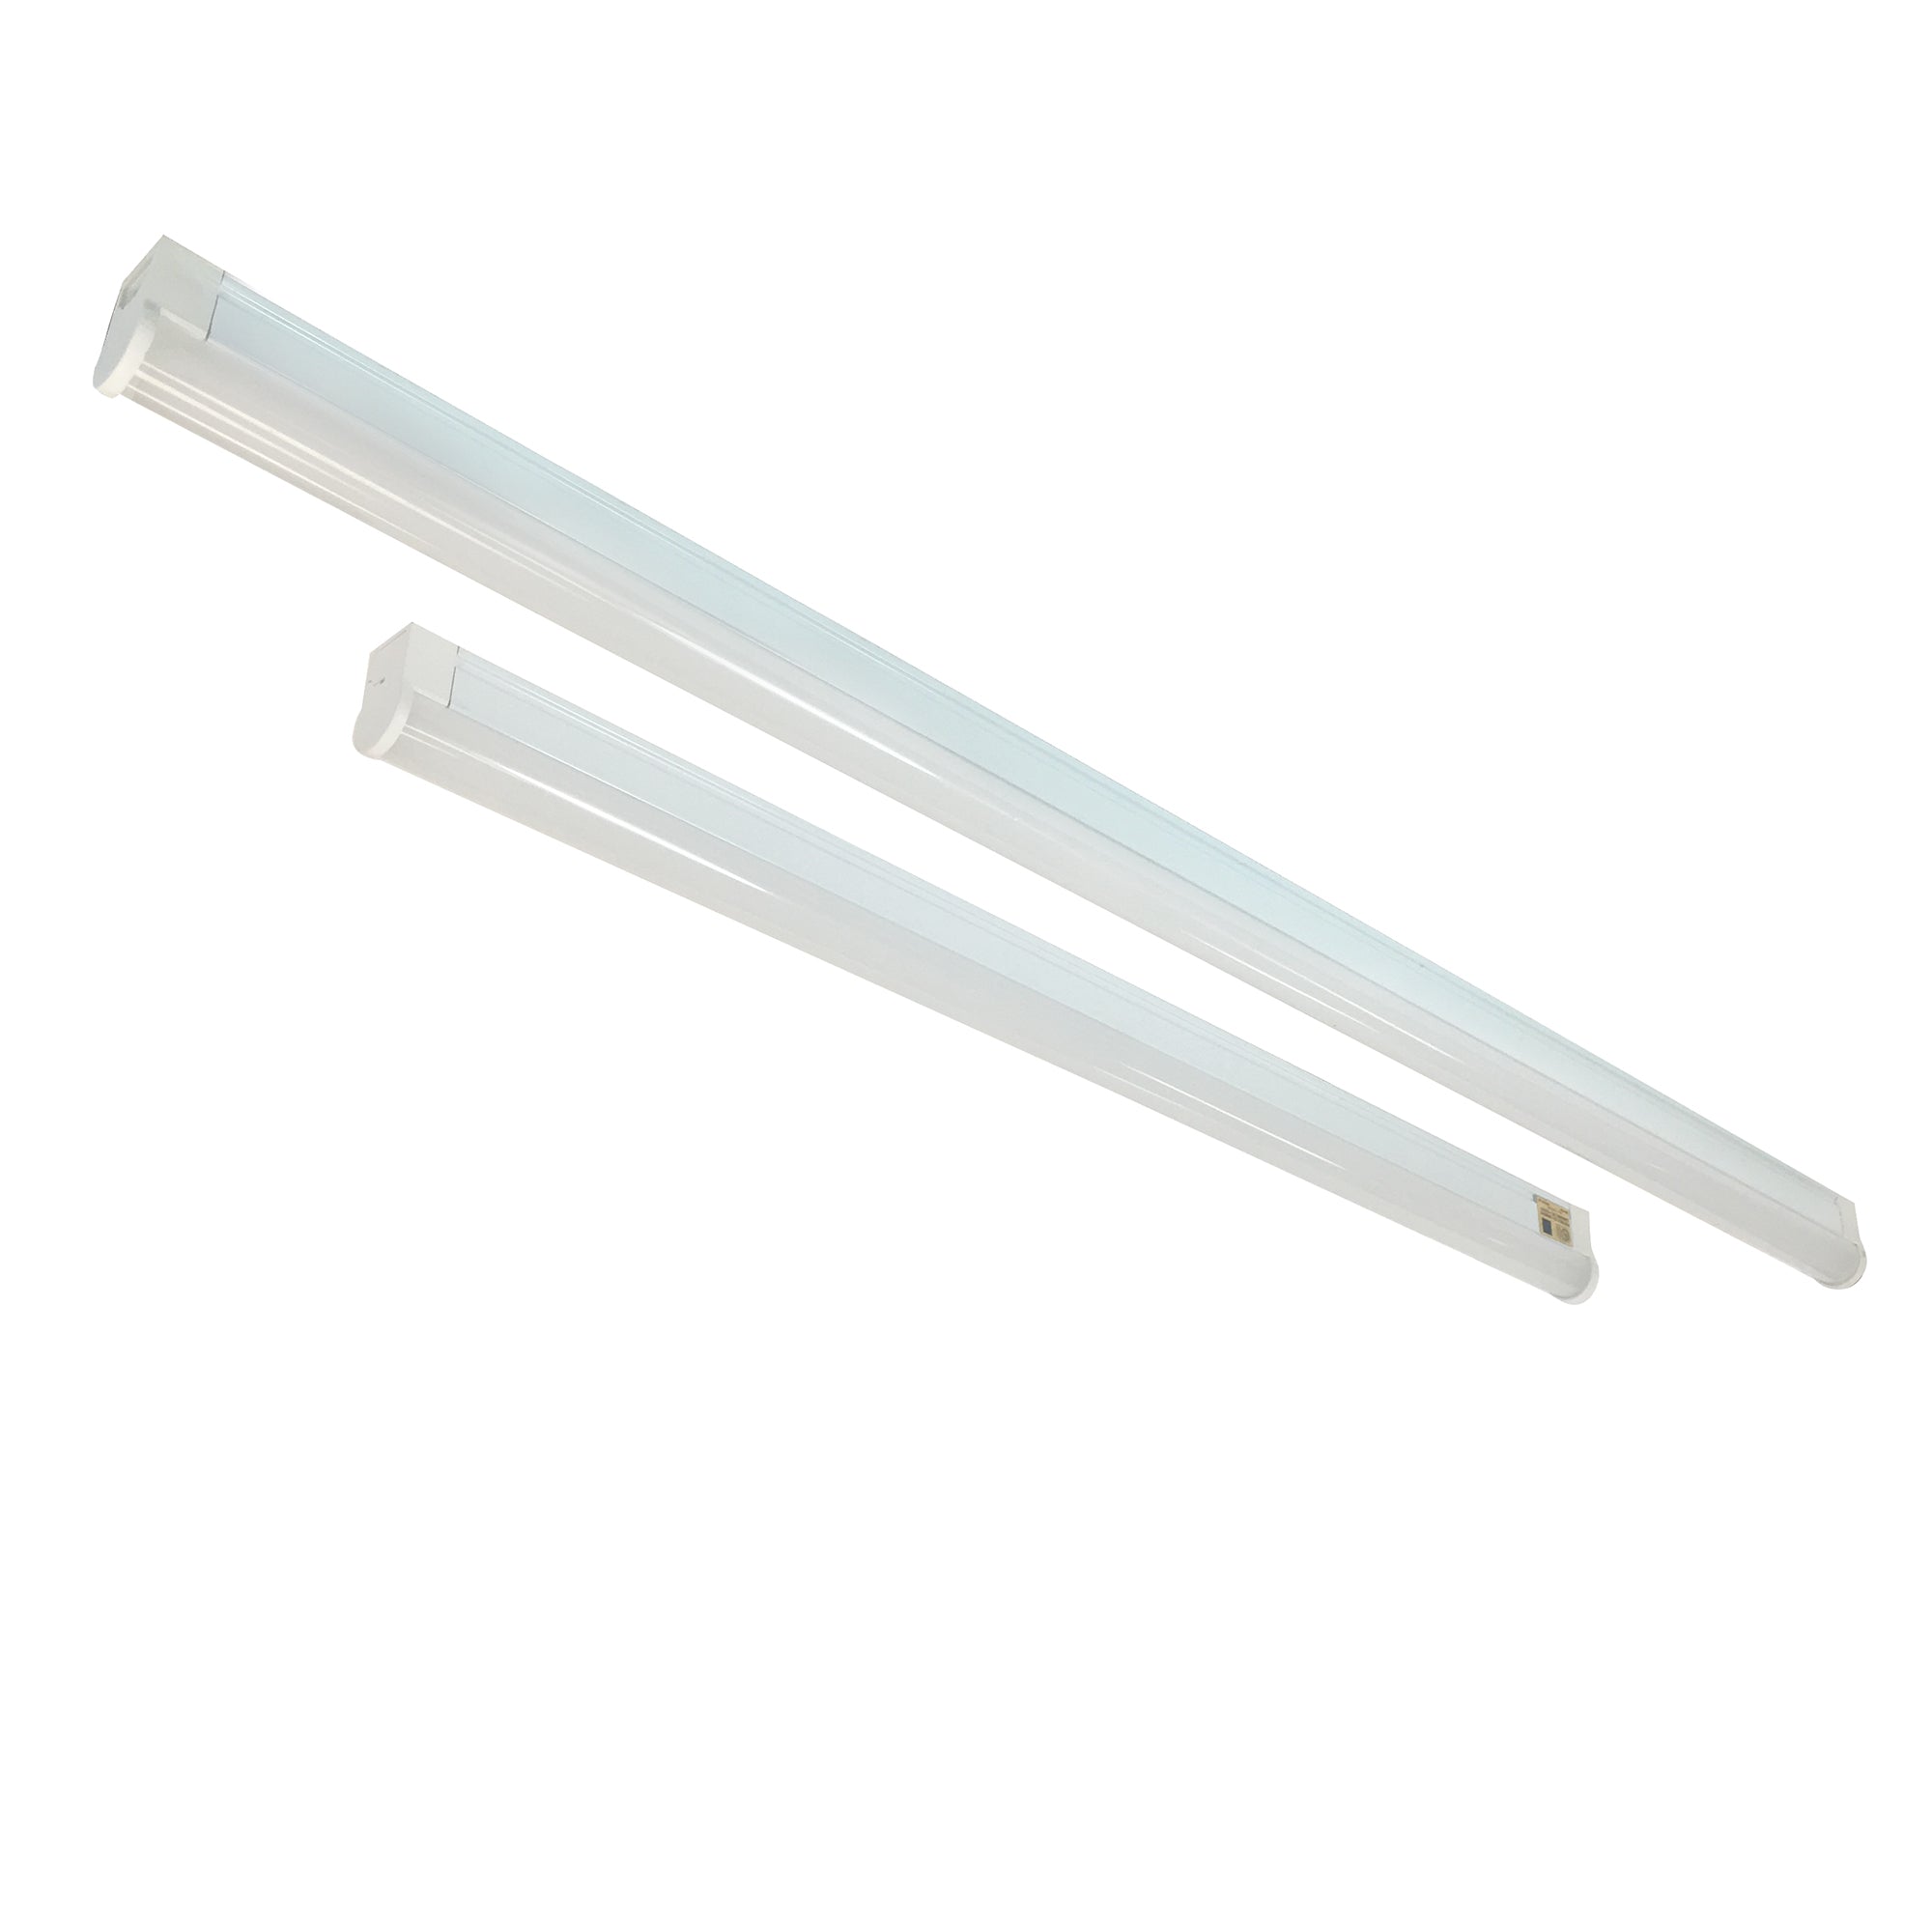 Nora Lighting NULS-LED4527W - Accent / Undercabinet - 45 Inch LED Linear Undercabinet, 2700K, White